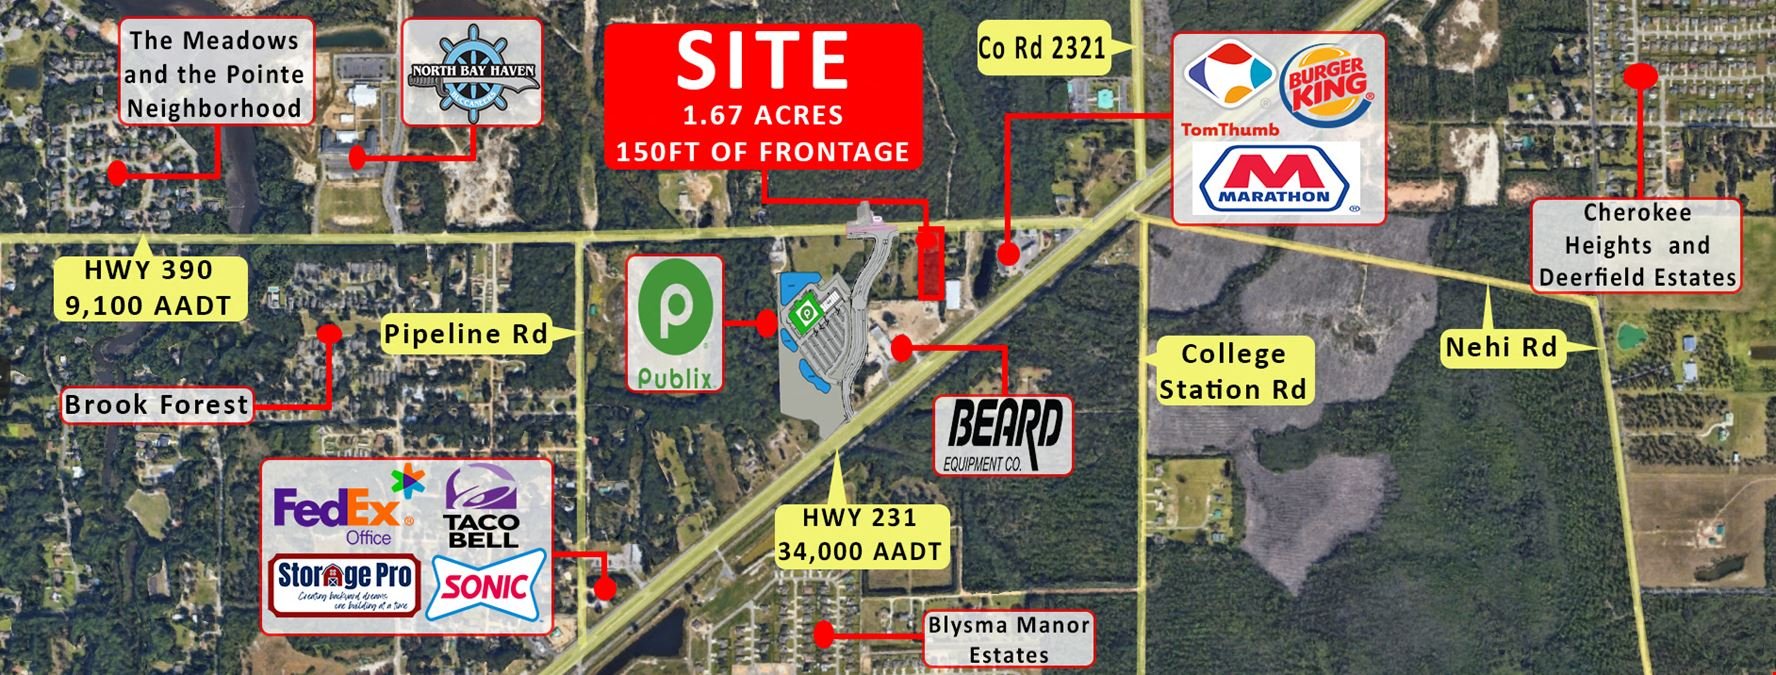 +/- 1.67 Acre Lot For Sale in Panama City, Florida